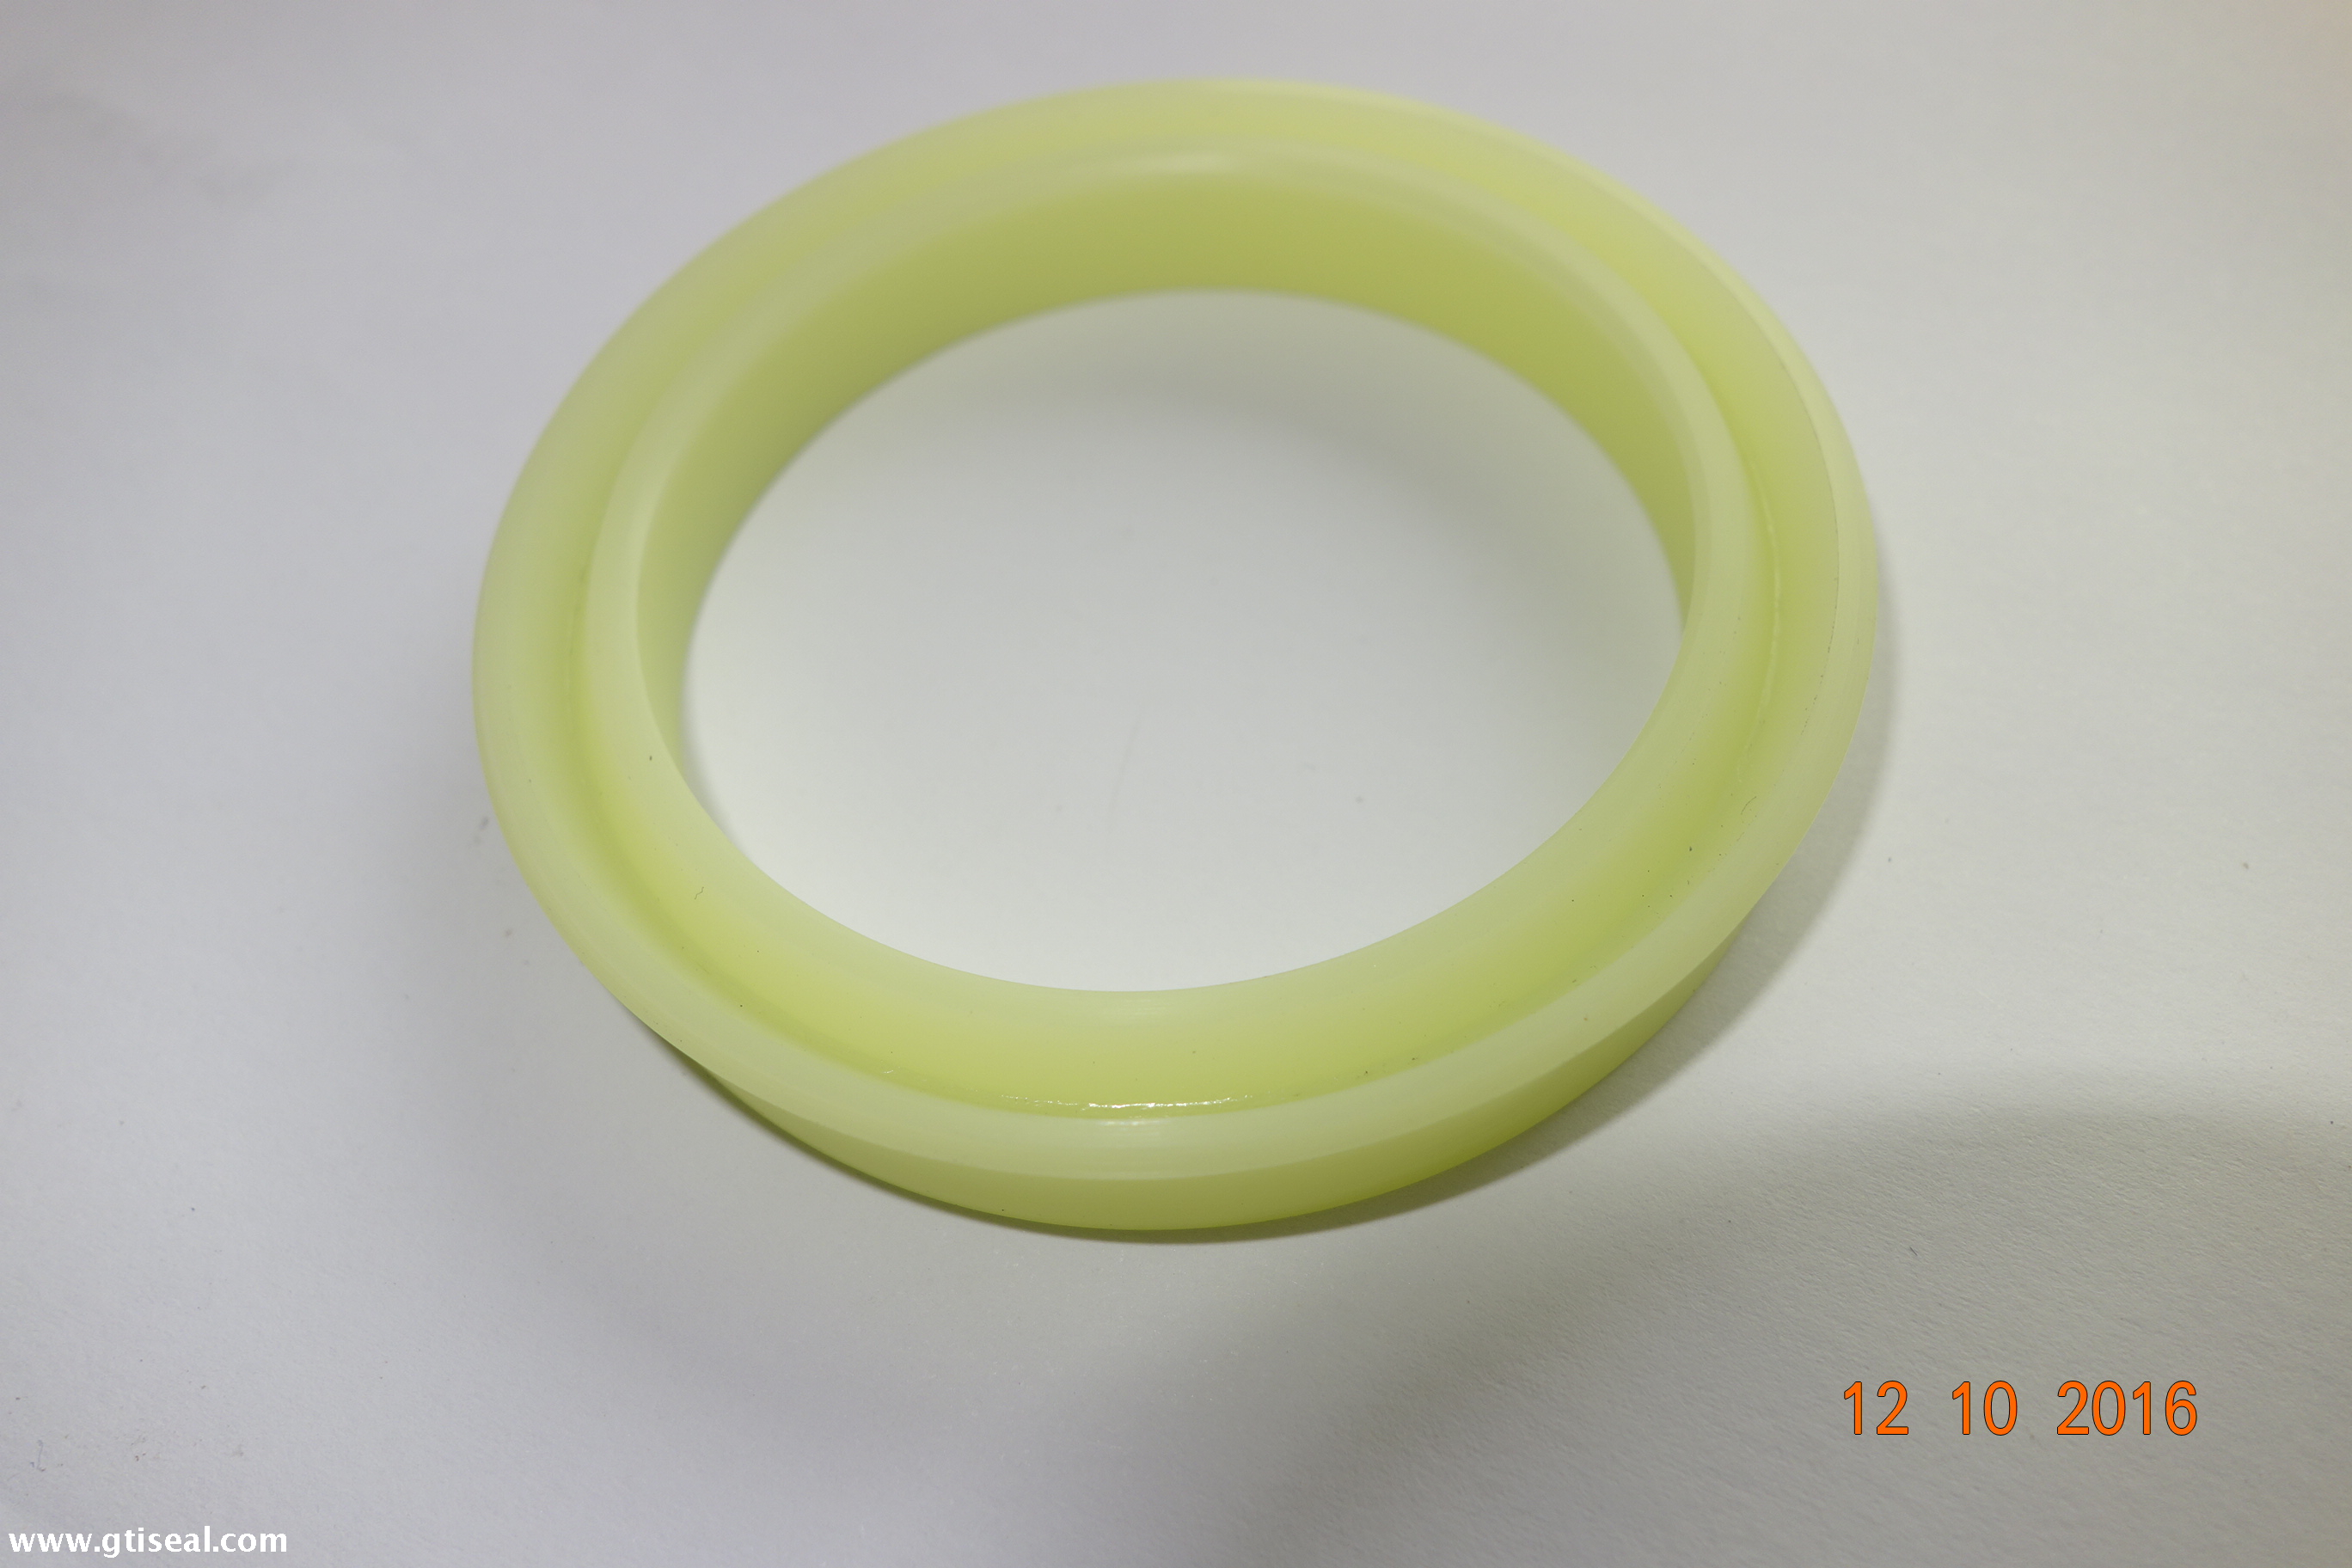 Hear pump hot water cylinder waterproof seal UHS PU oil seal for ex-factory price